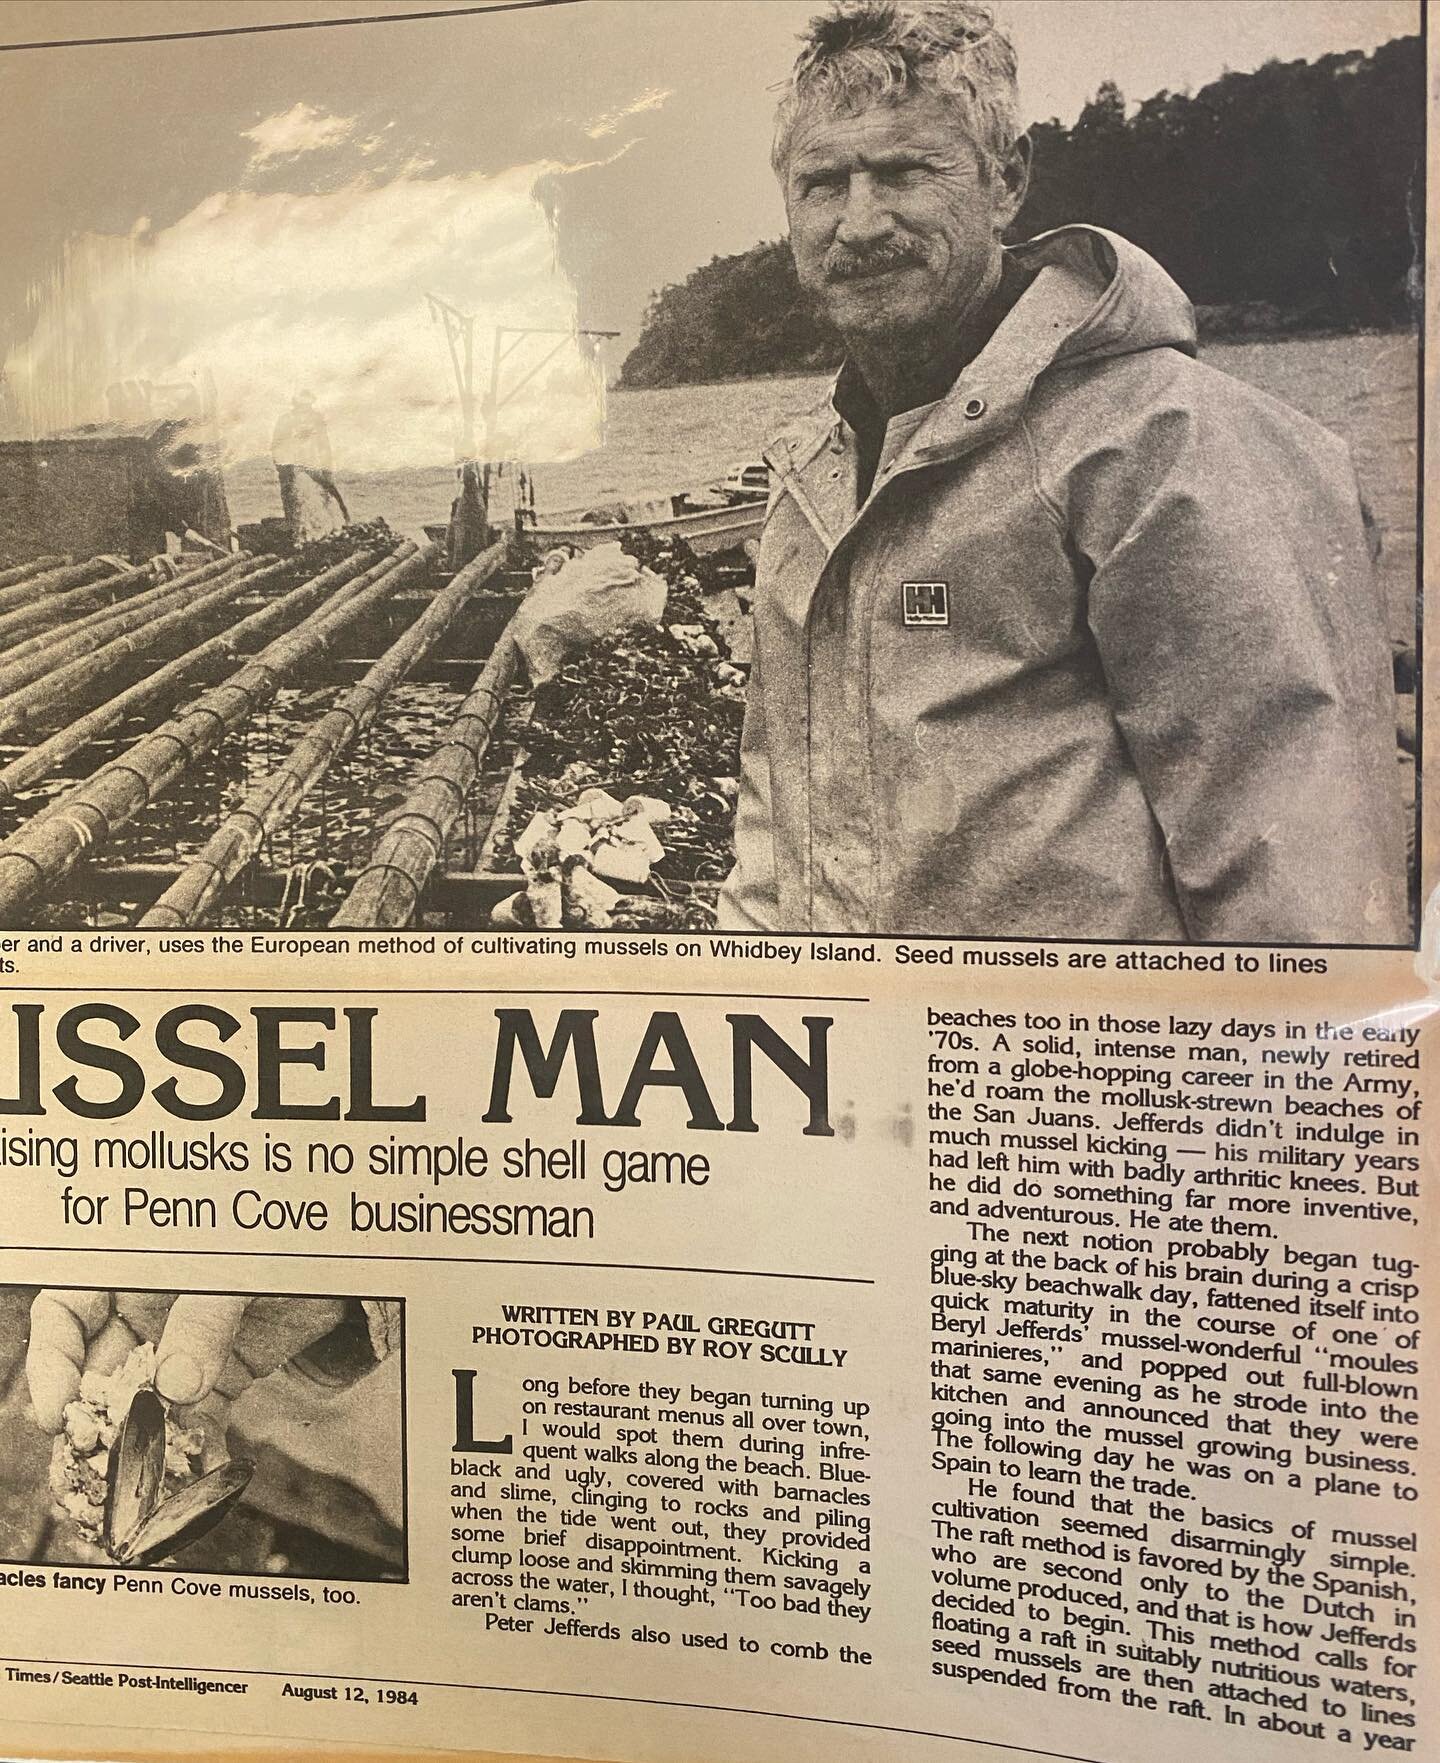 #onthisday August 12, 1984 The Seattle Times published an article on our thriving Penn Cove Mussel Farm! 

➡️swipe to read more! 

#mussels #shipping #overnightshipping #tistheseason #oysters #clams #penncoveshellfish #penncove #farmtotable #freshsea